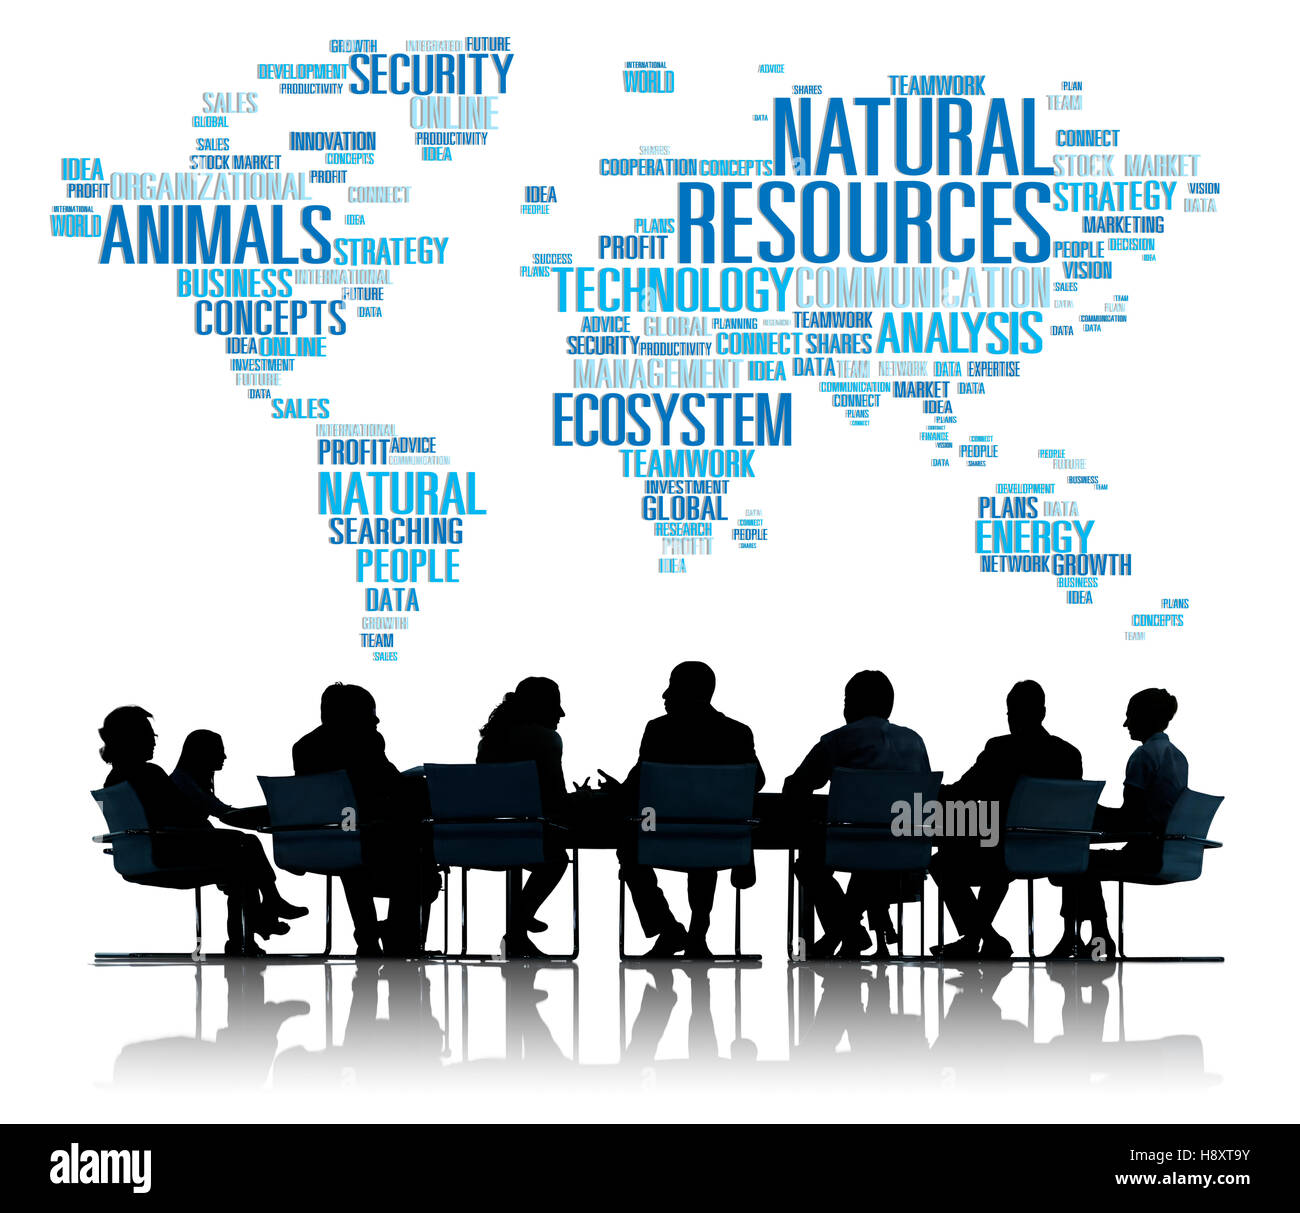 Natural Resources Environmental Conservation Sustainability Concept Stock Photo